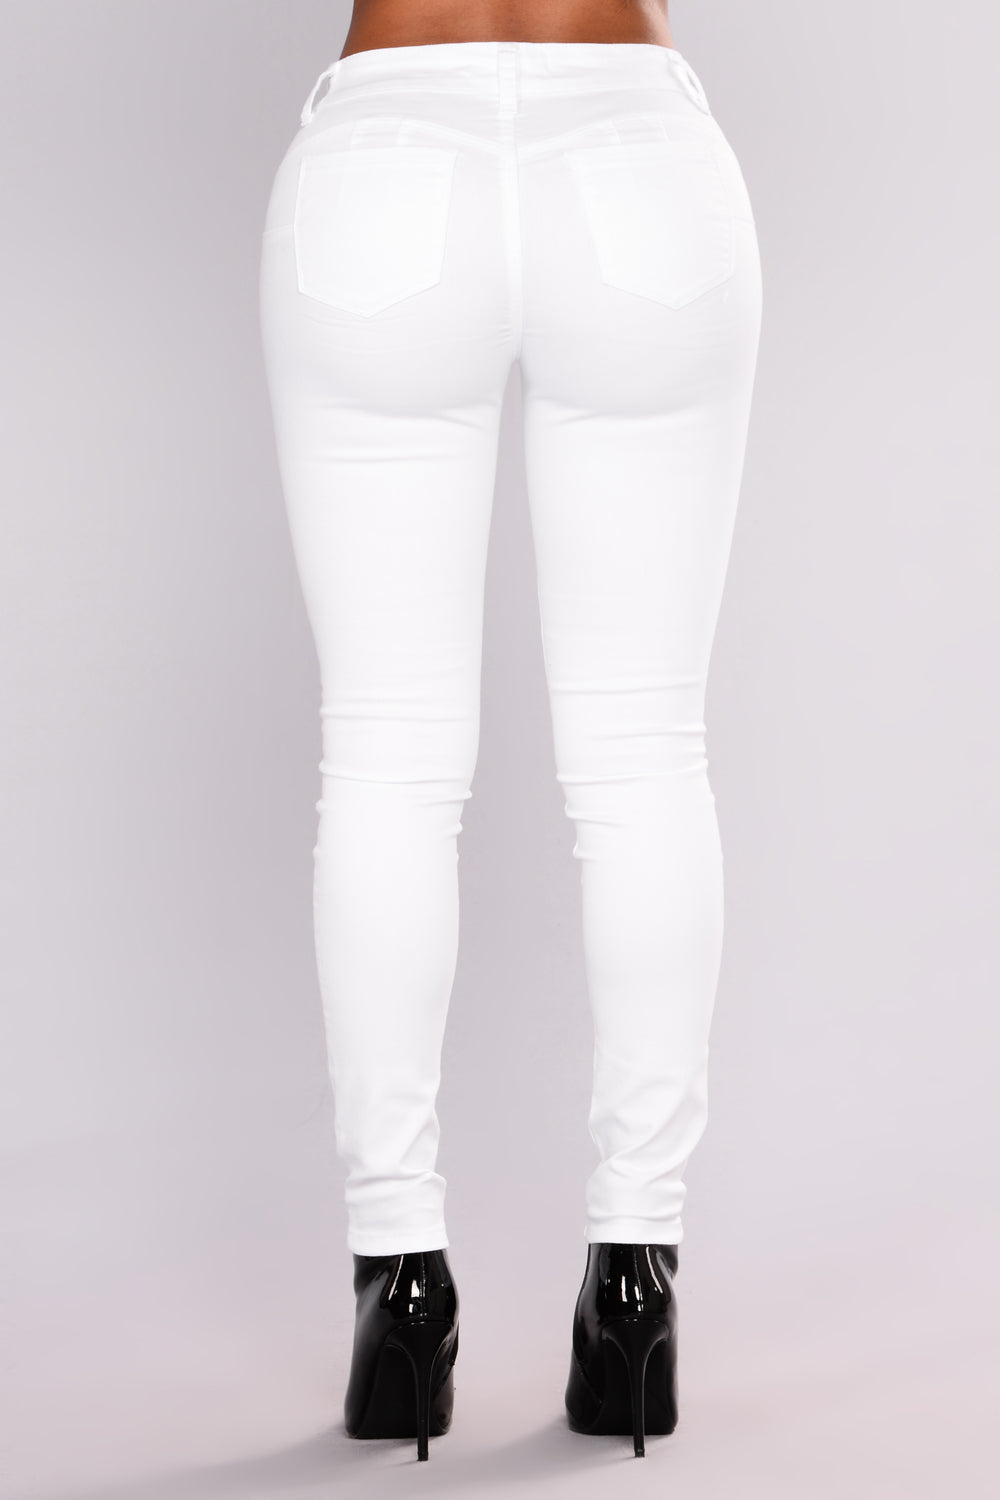 Twill Booty Lifting Pants - White